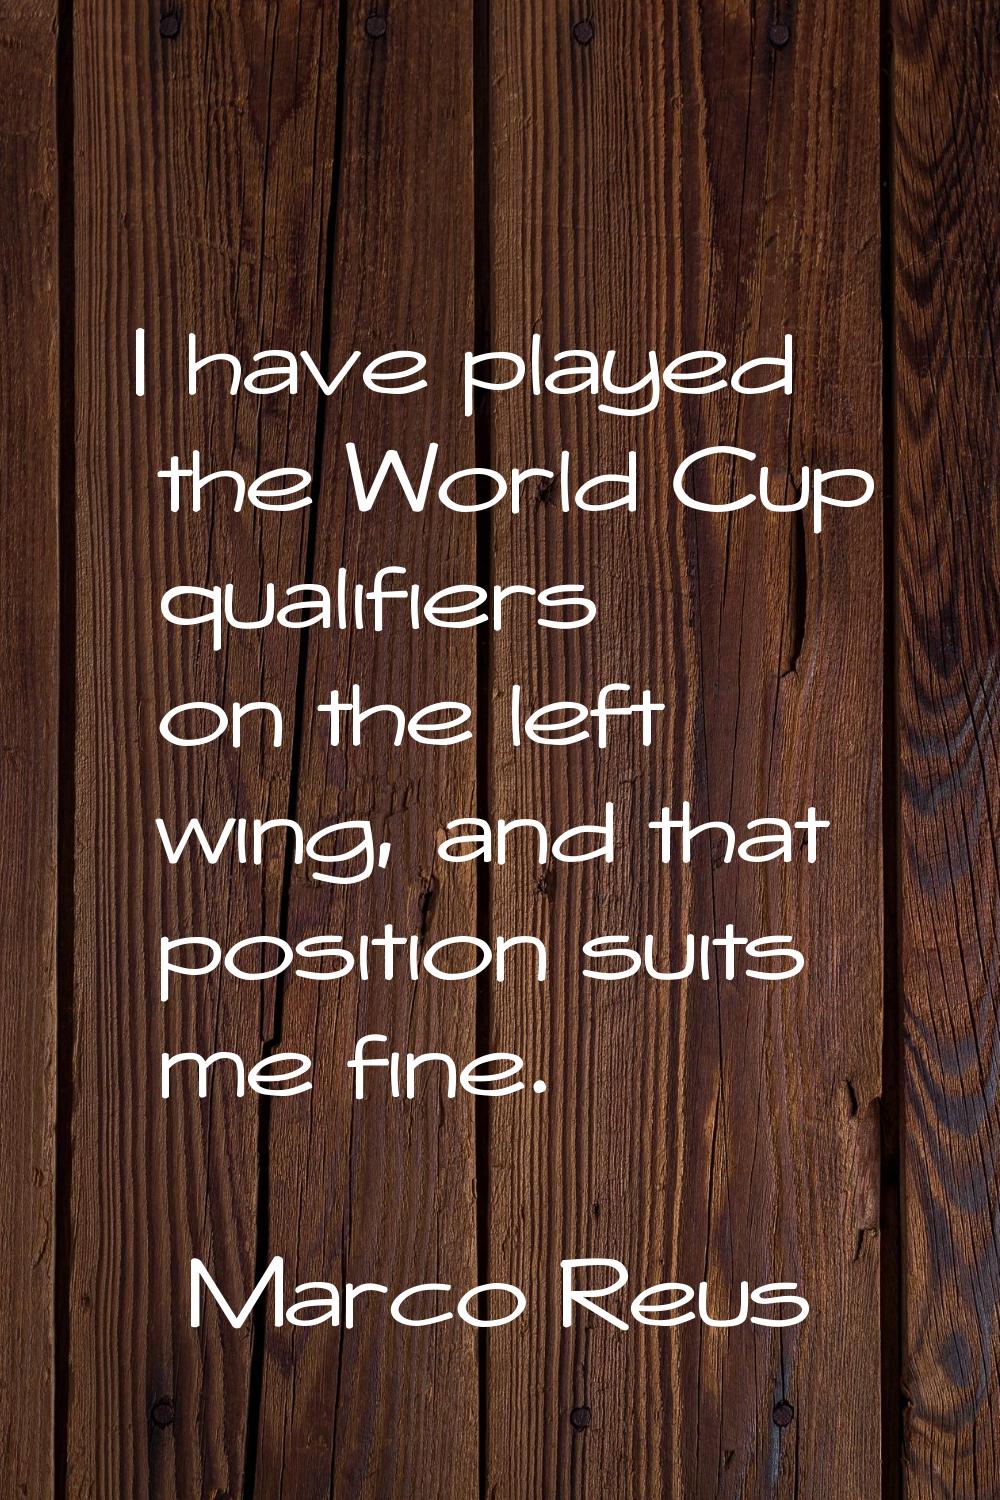 I have played the World Cup qualifiers on the left wing, and that position suits me fine.